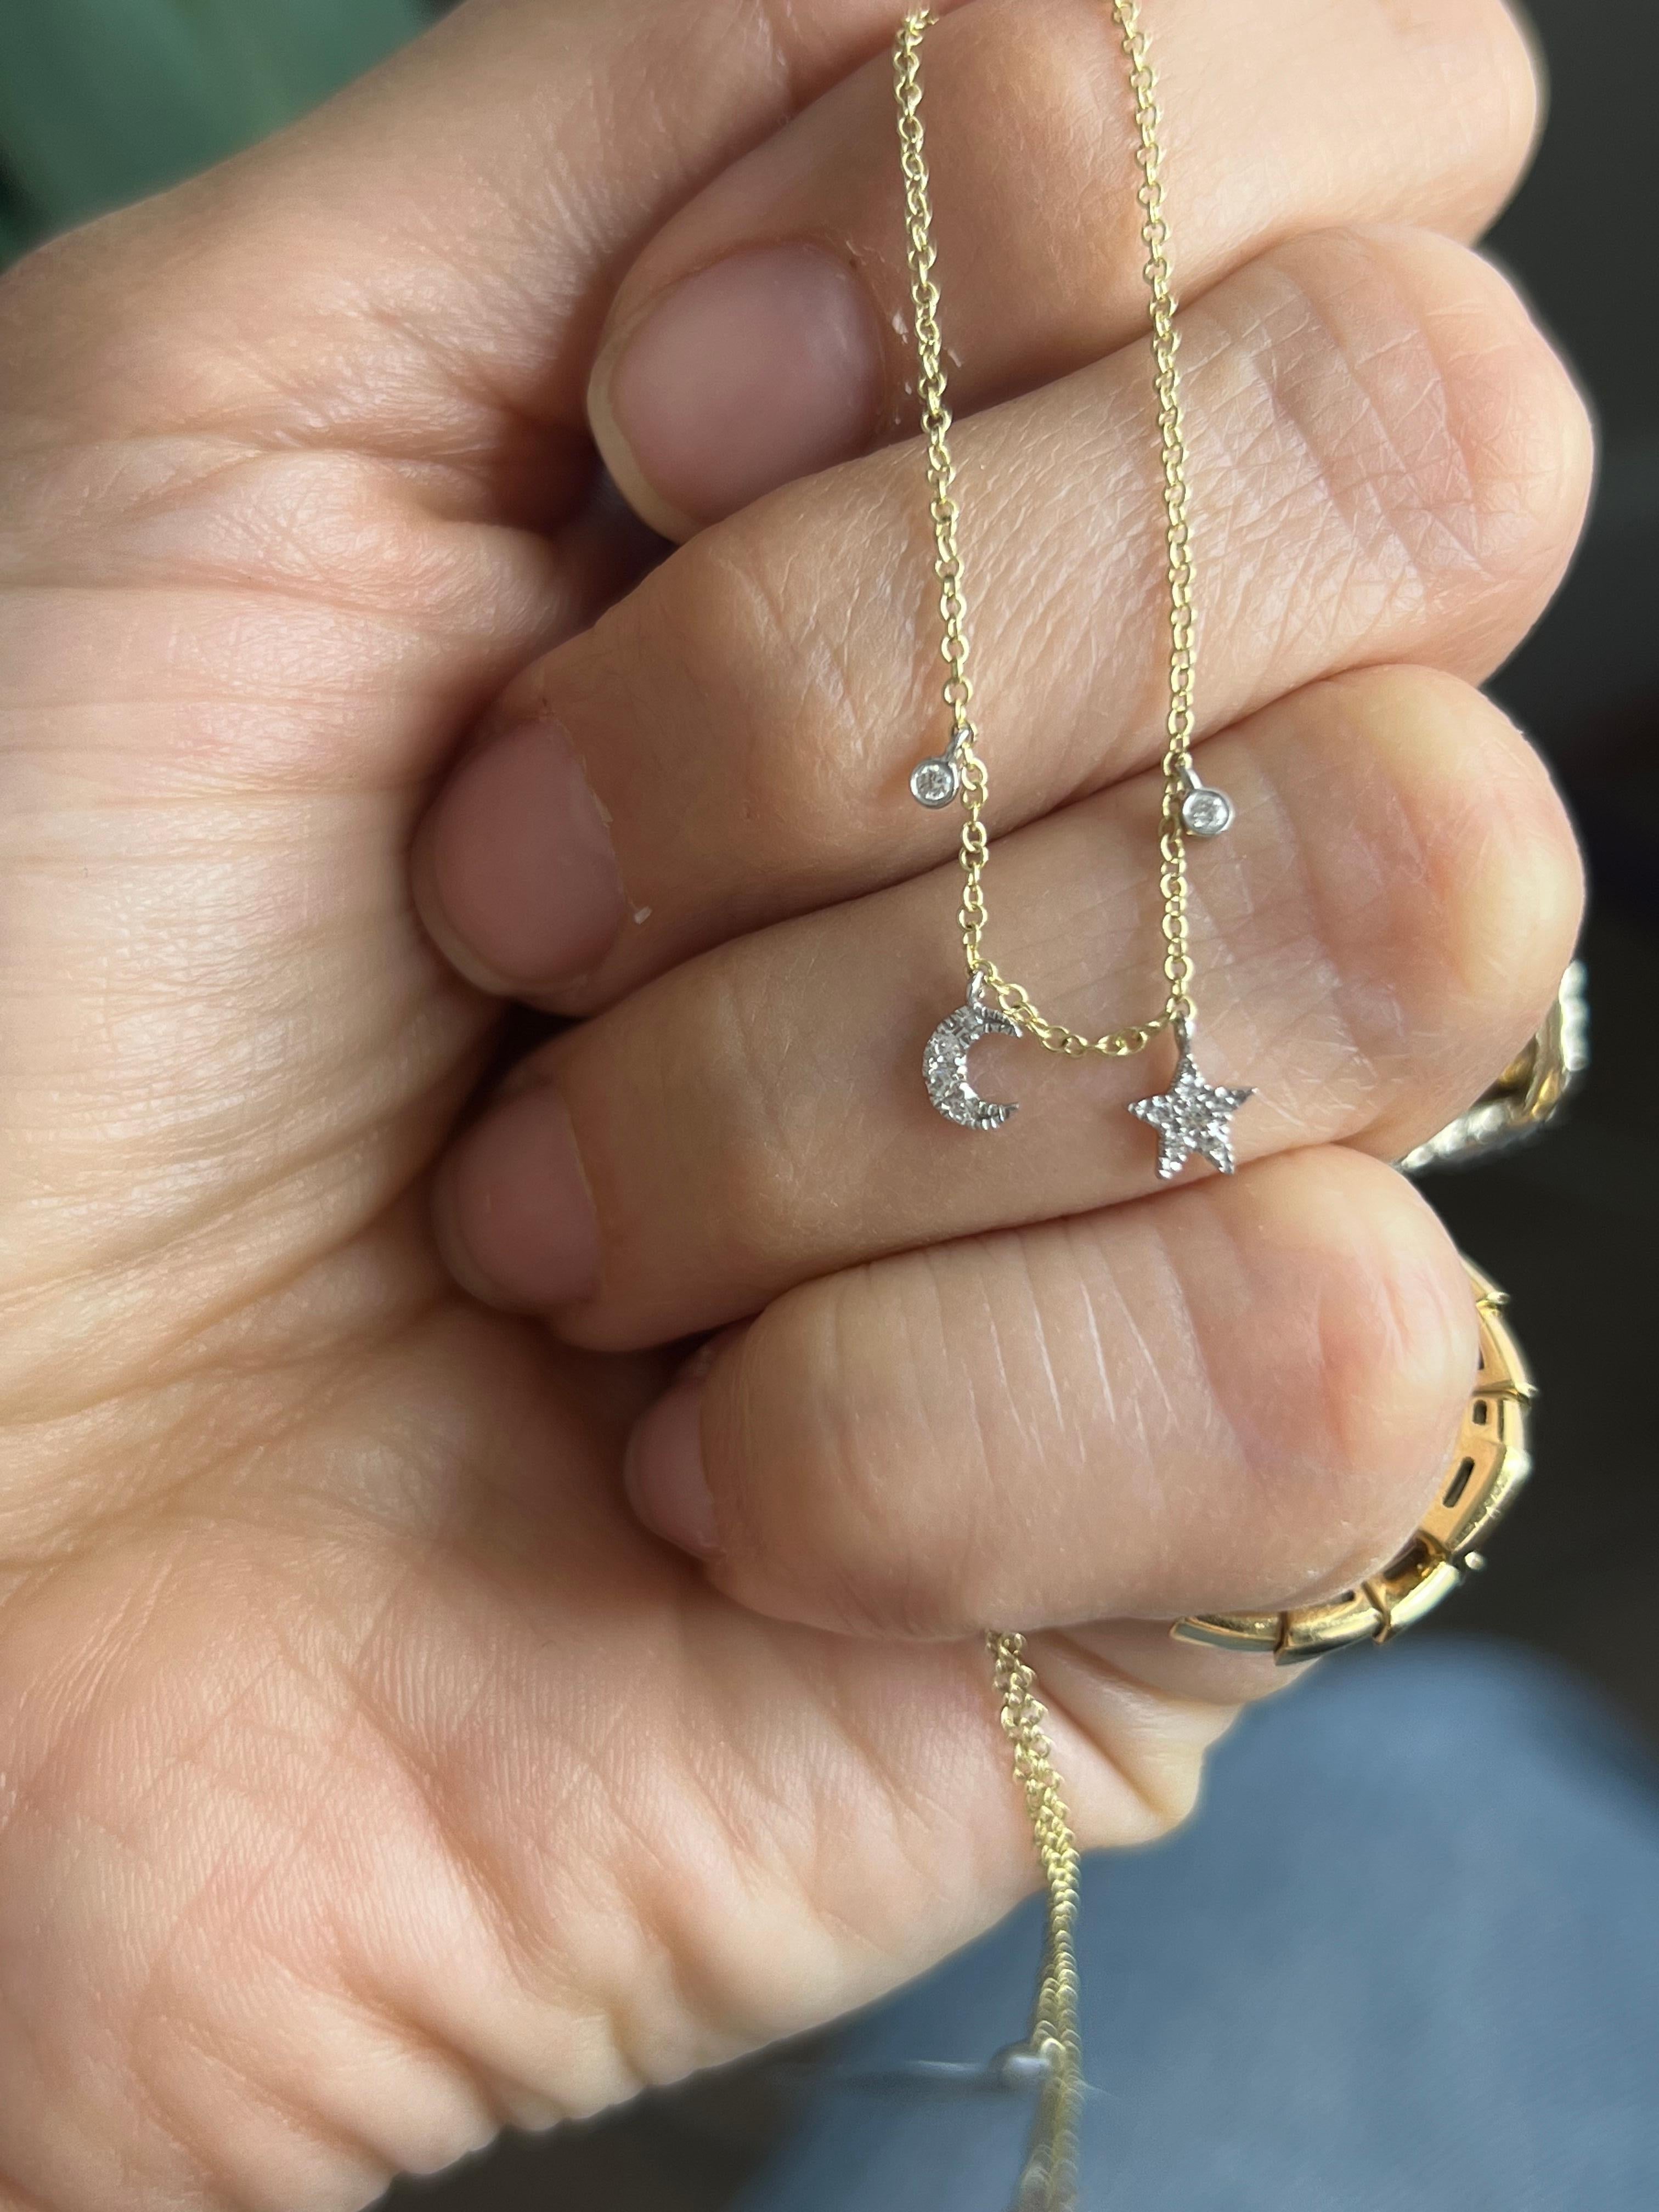 14K yellow gold and diamond moon and star necklace

Meira T is a renowned jewelry designer who has been crafting exquisite pieces for over two decades. Her designs are inspired by her global travels, and her pieces are made with the finest quality